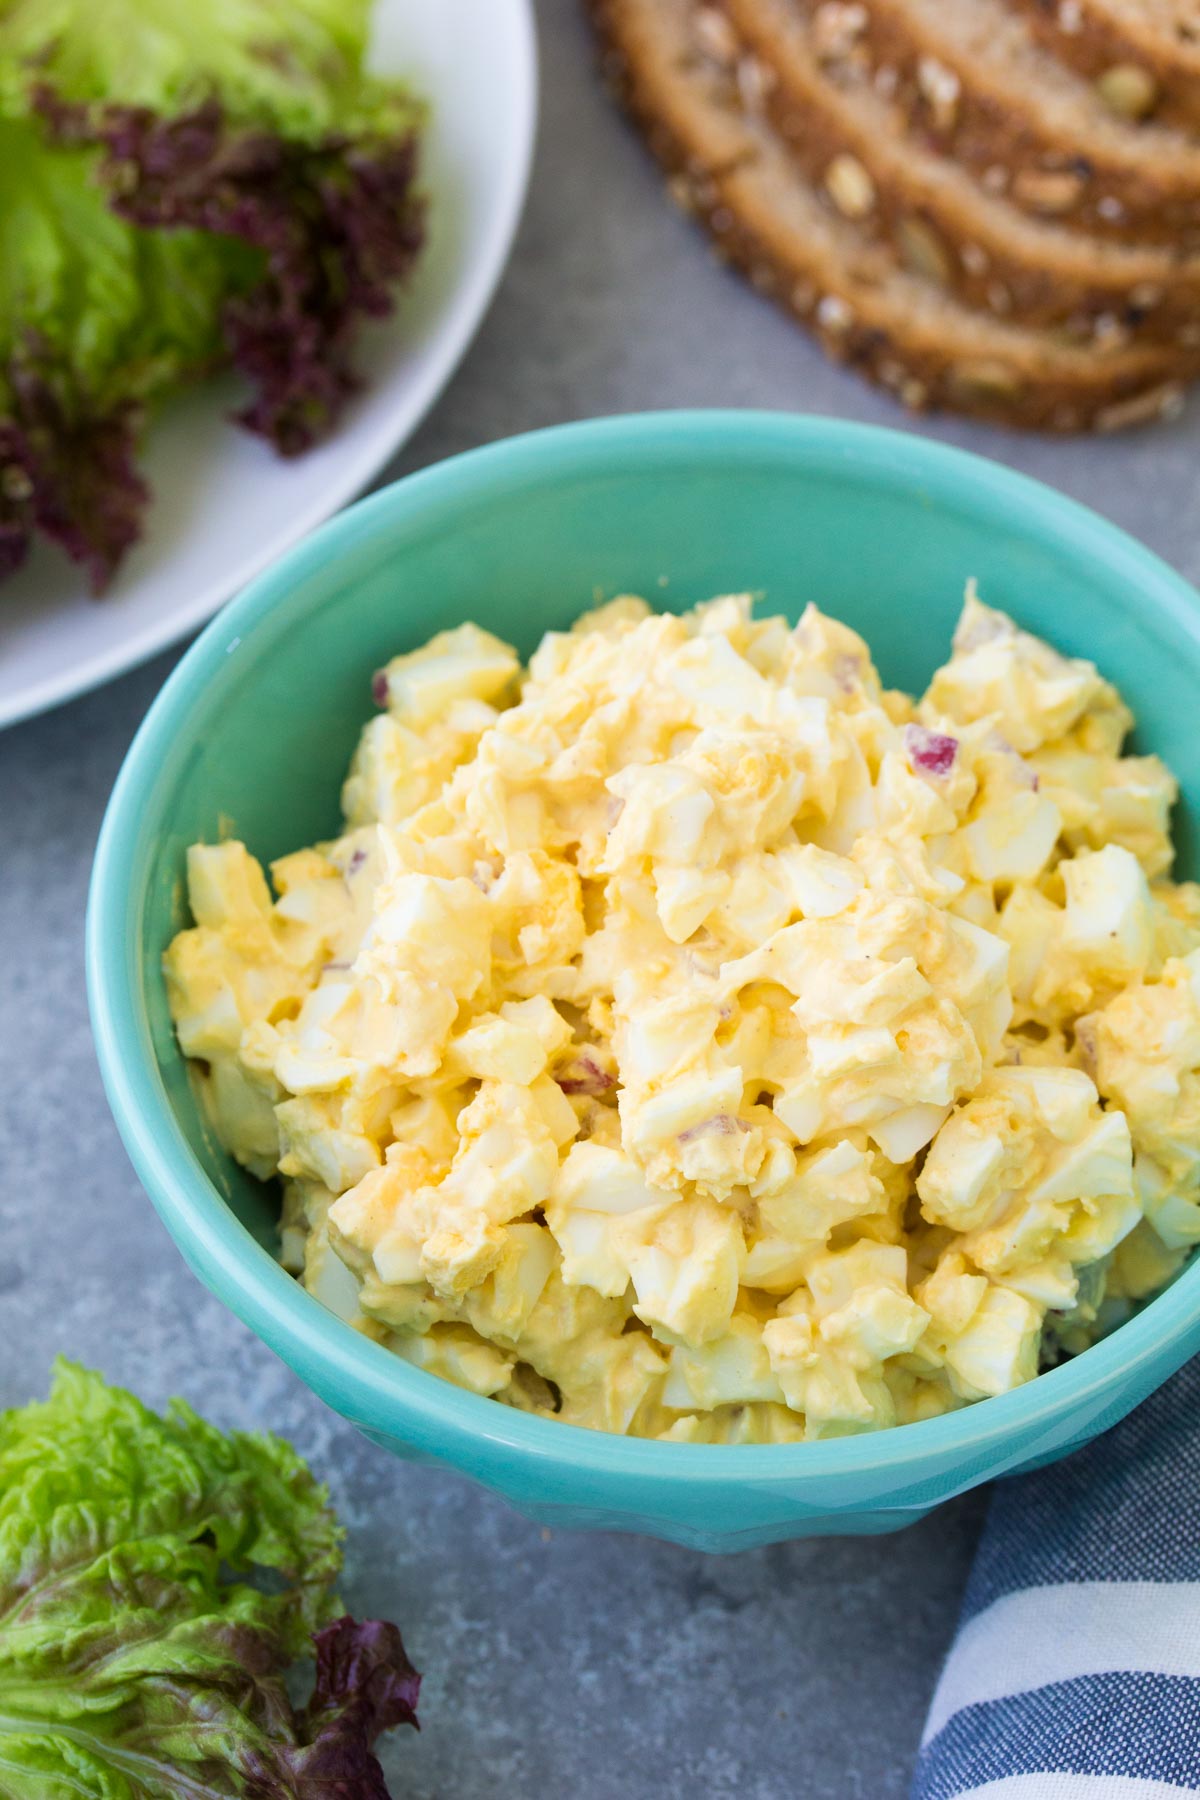 Easy Egg Salad Recipe - Makes the BEST Sandwiches!